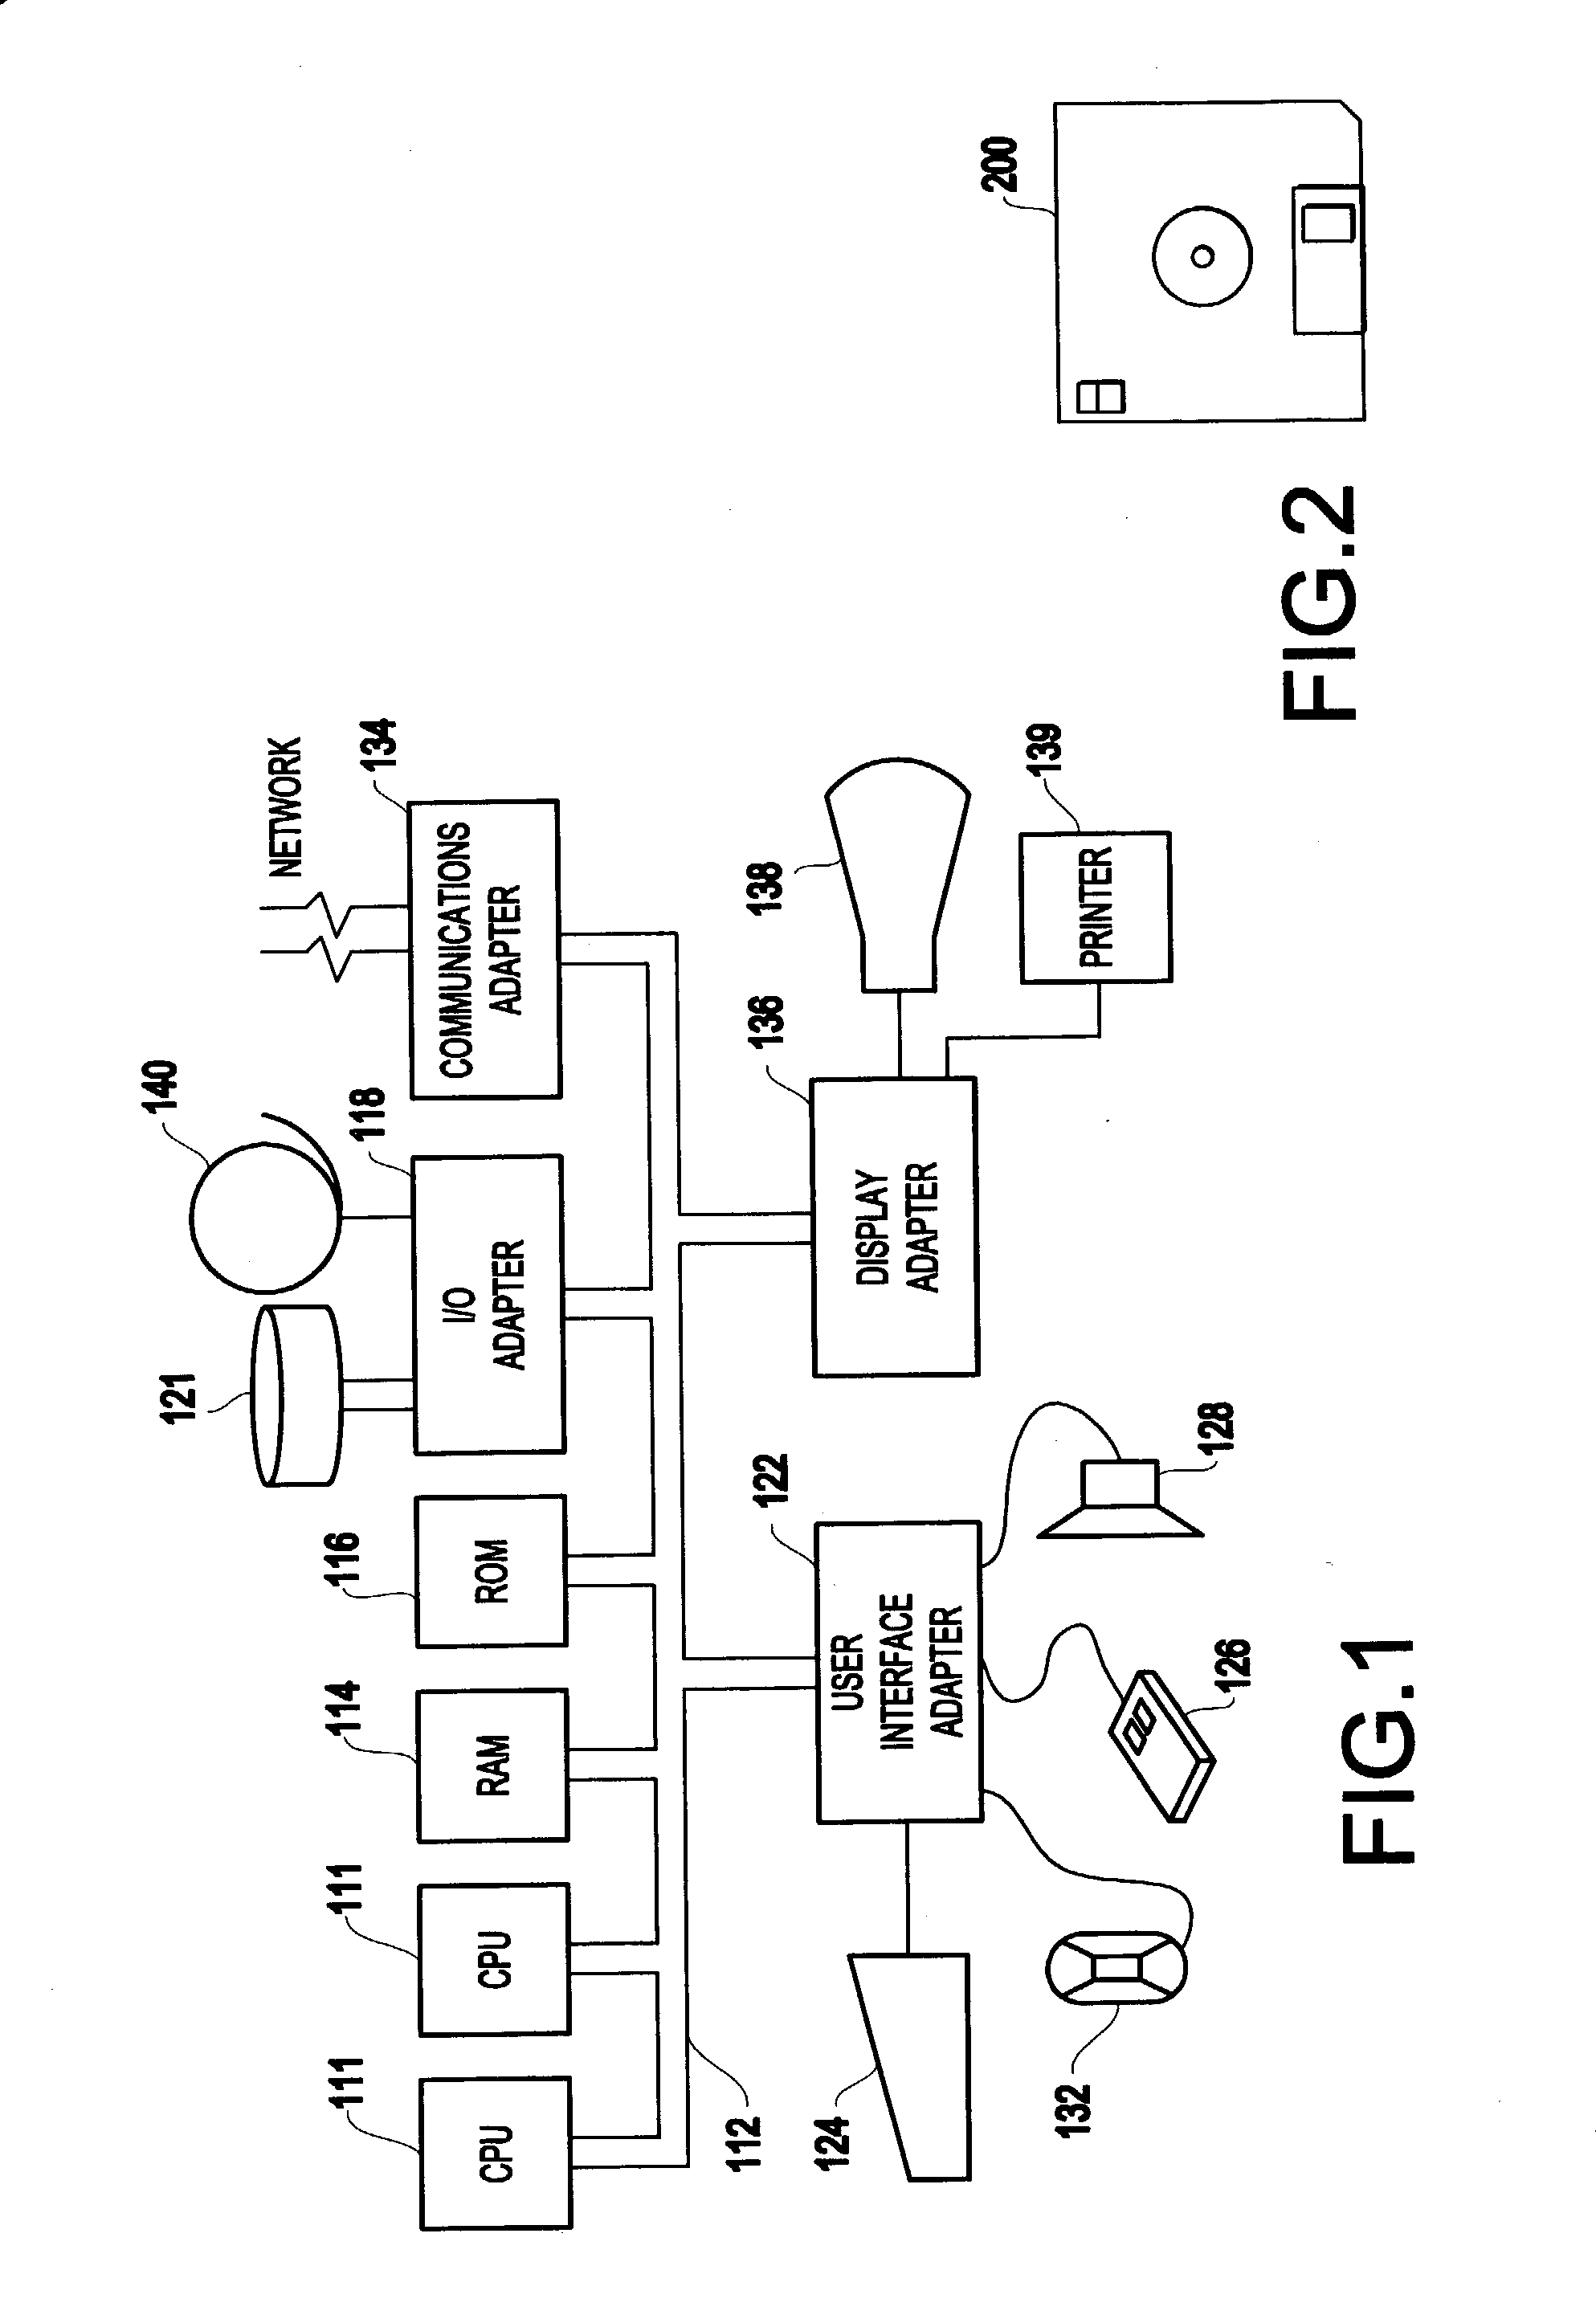 Method and system for generating an optimized suite of test cases